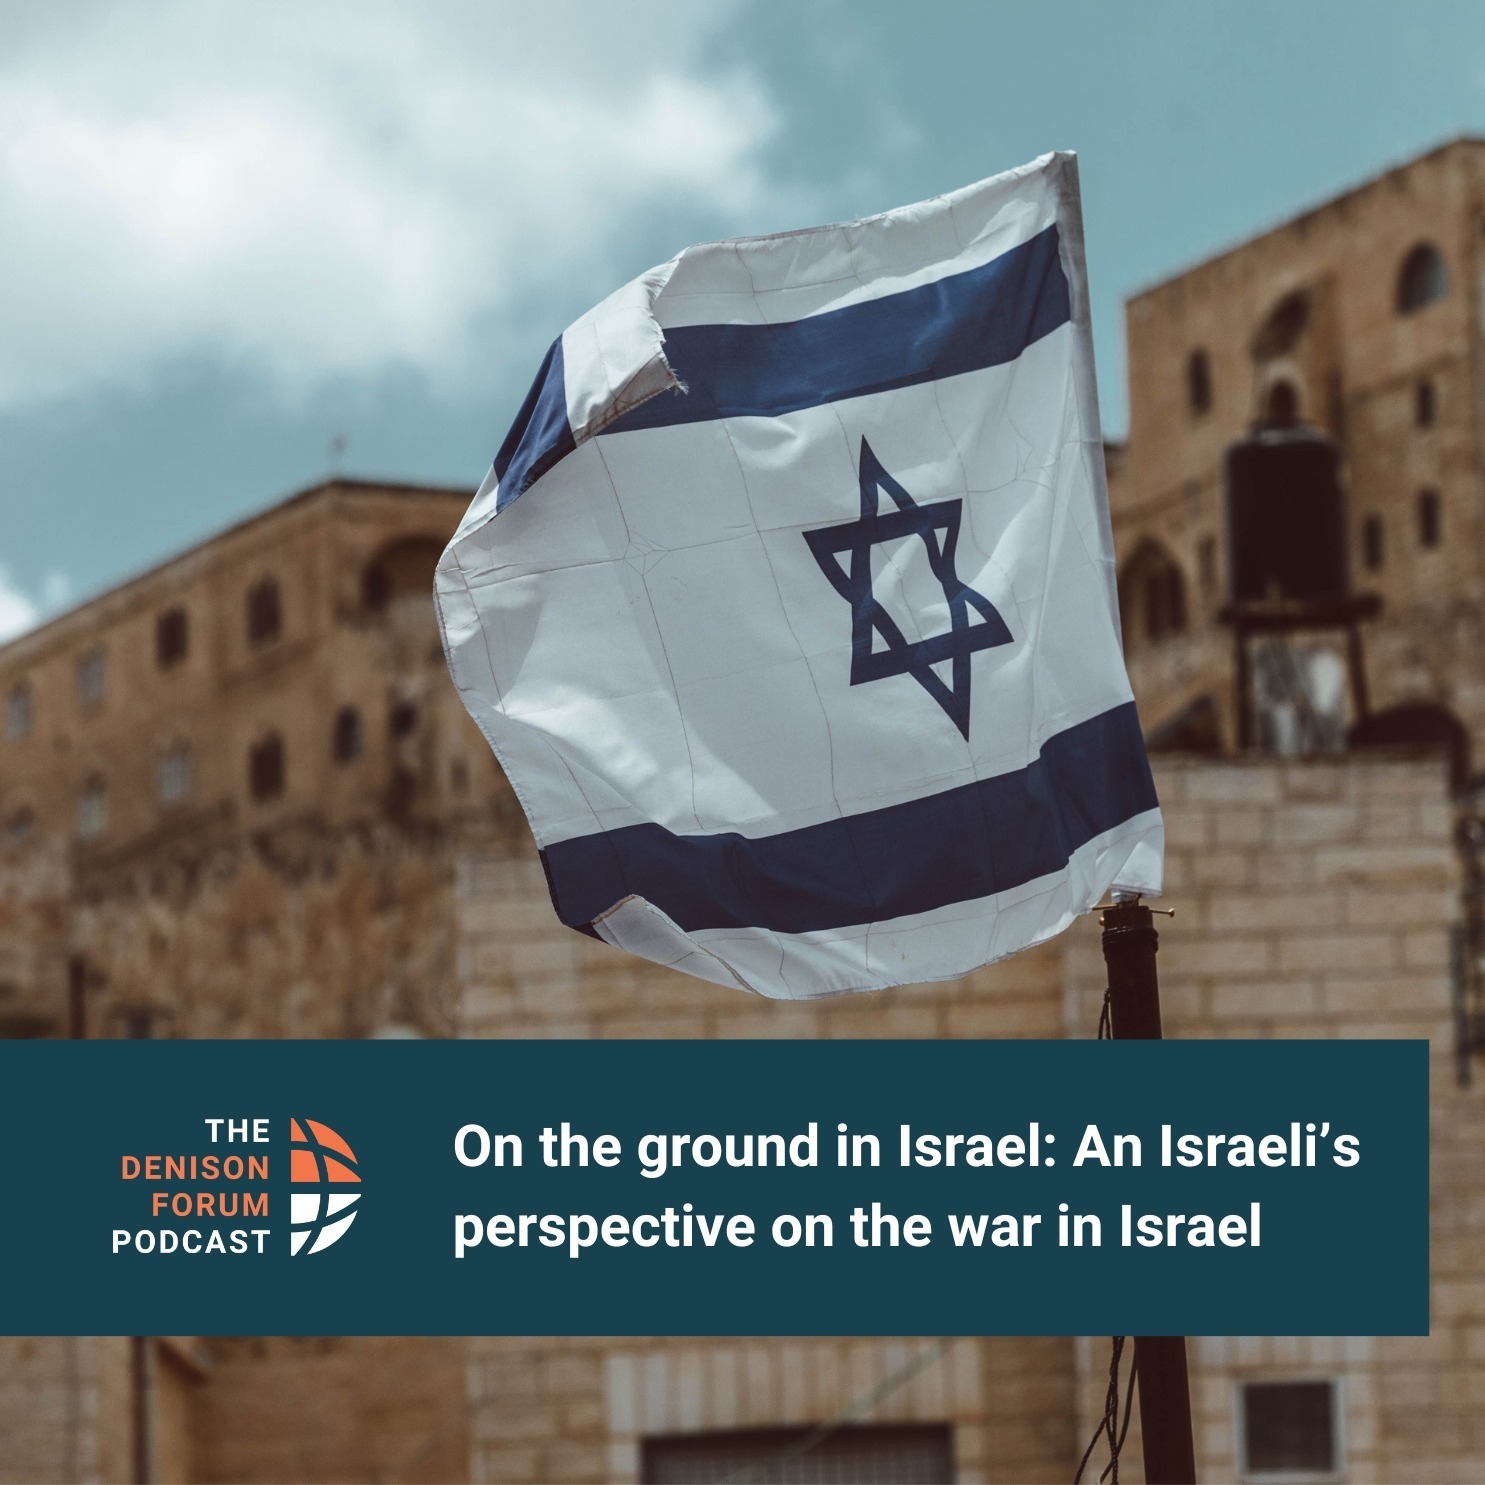 On the ground in Israel: An Israeli’s perspective on the war